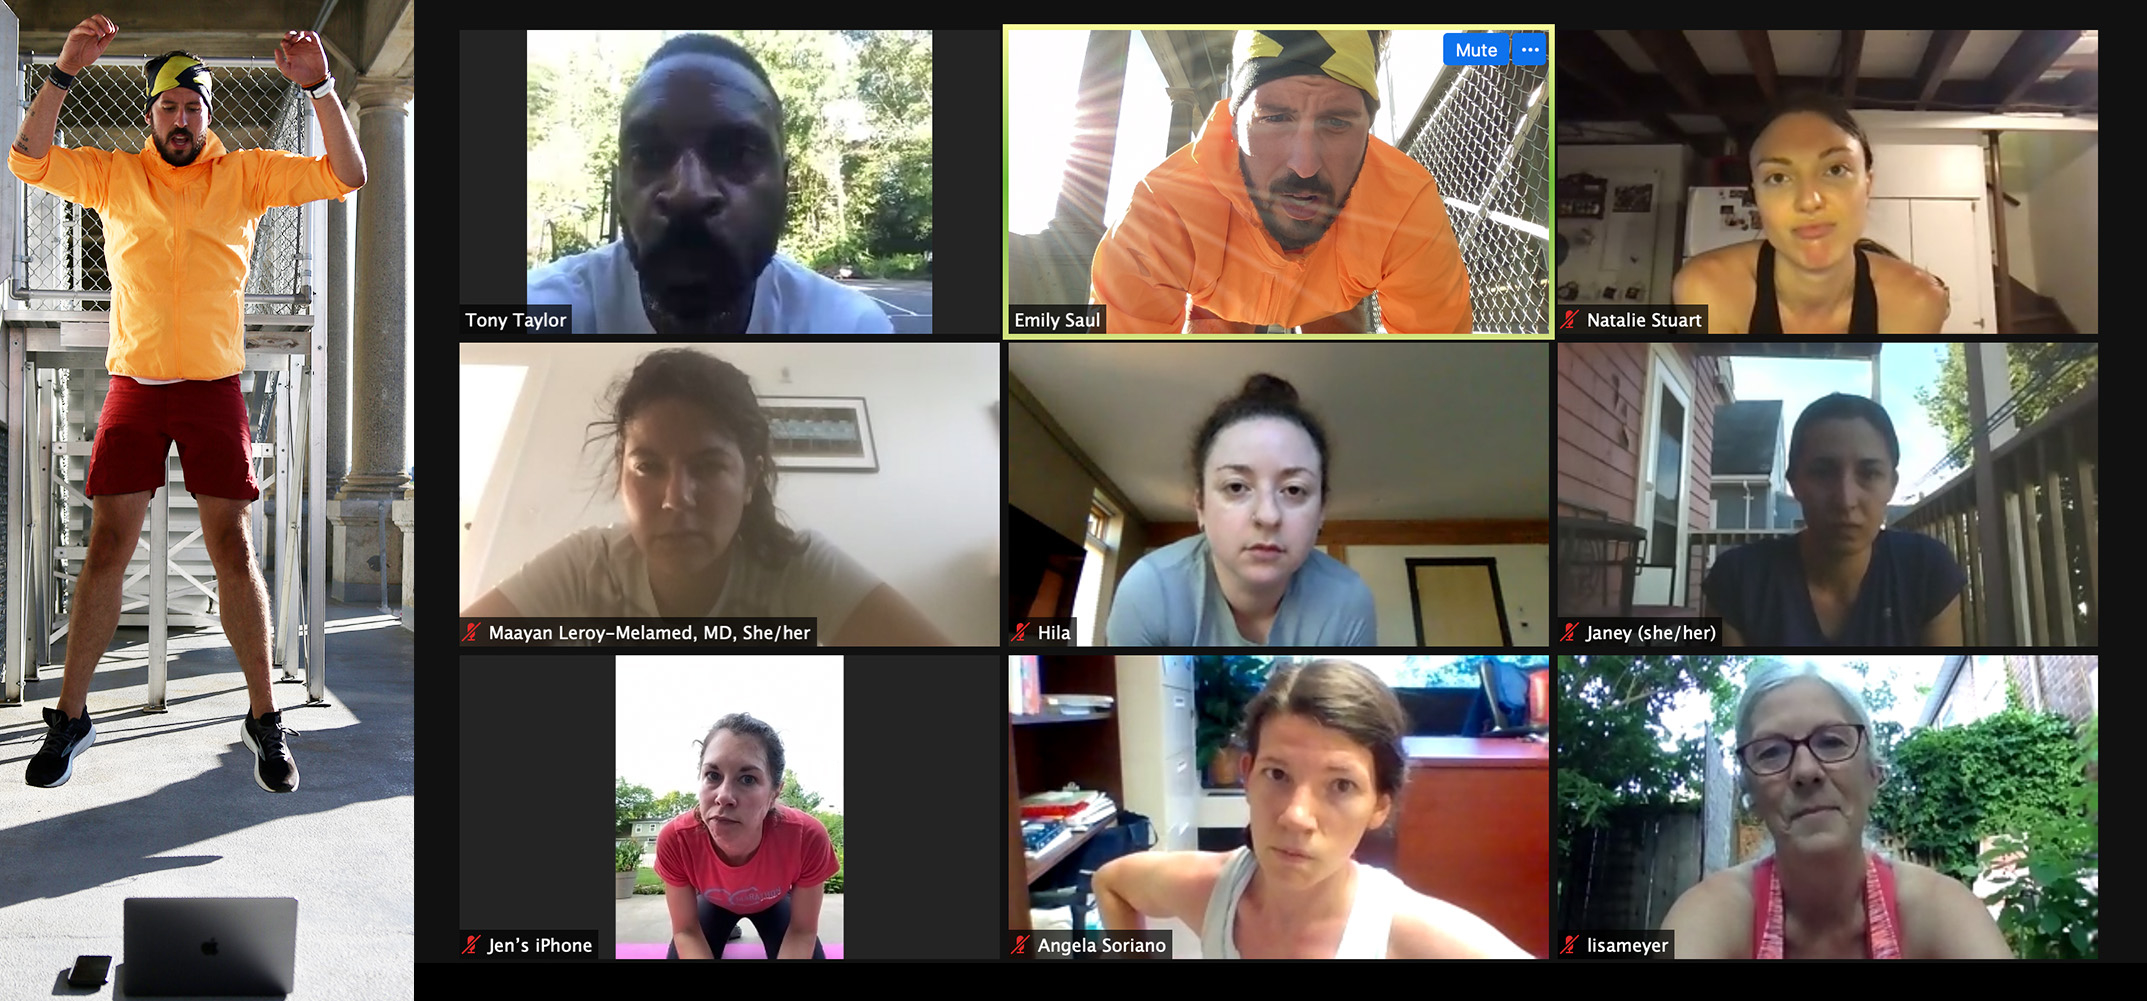 Chris Capozzi led a virtual workout class for November Project from Harvard Stadium on June 23. Others tuned in via Zoom.